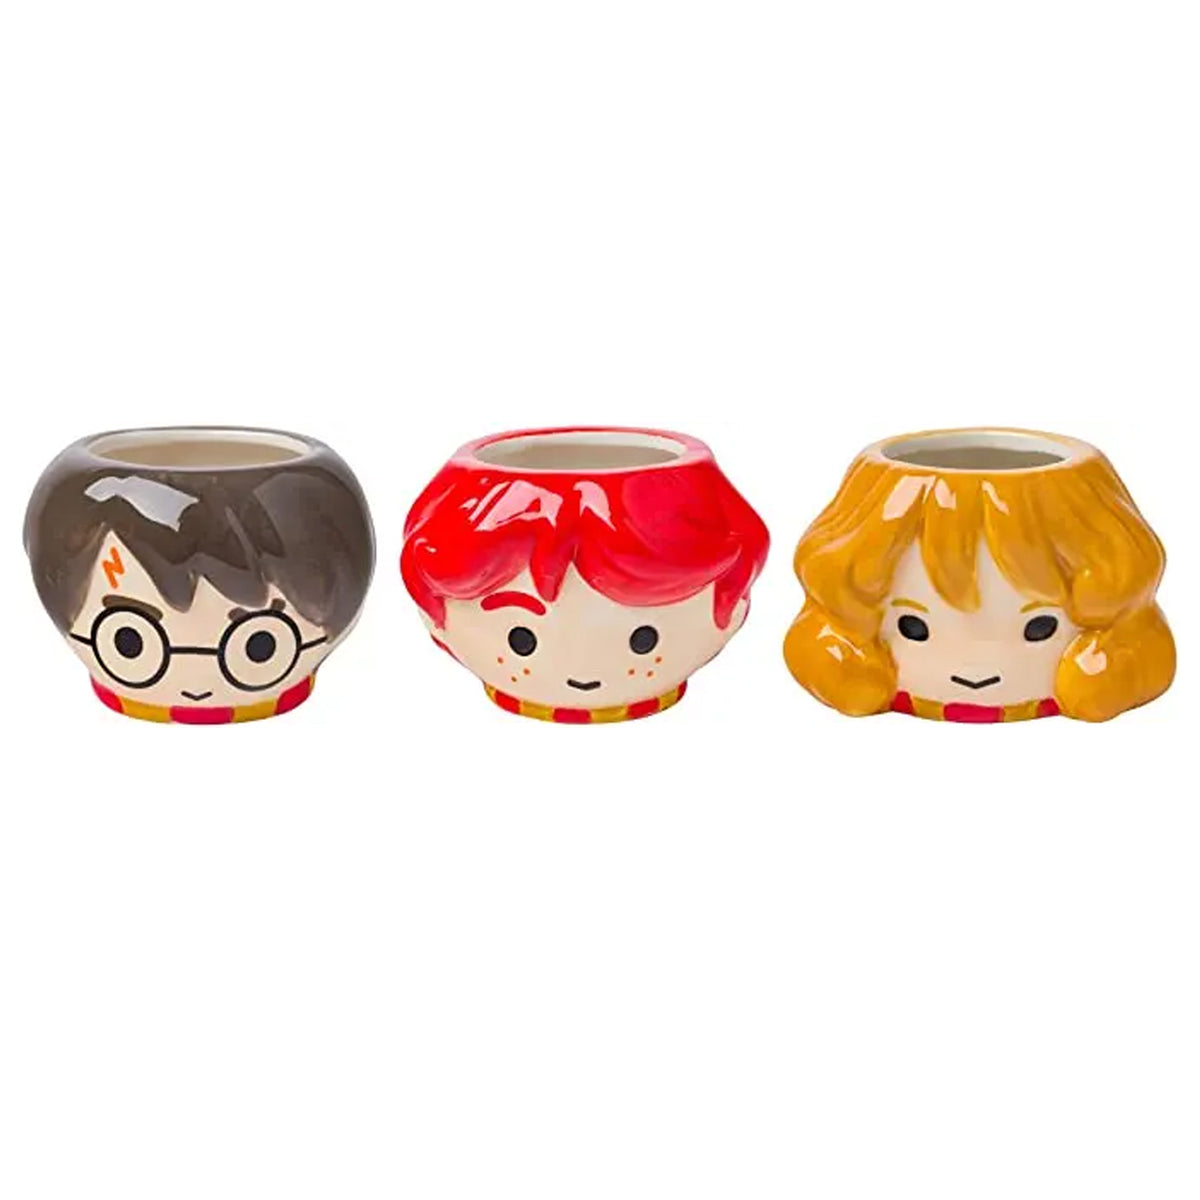 Harry Potter Hermione and Ron Mini Sculted Mug Set